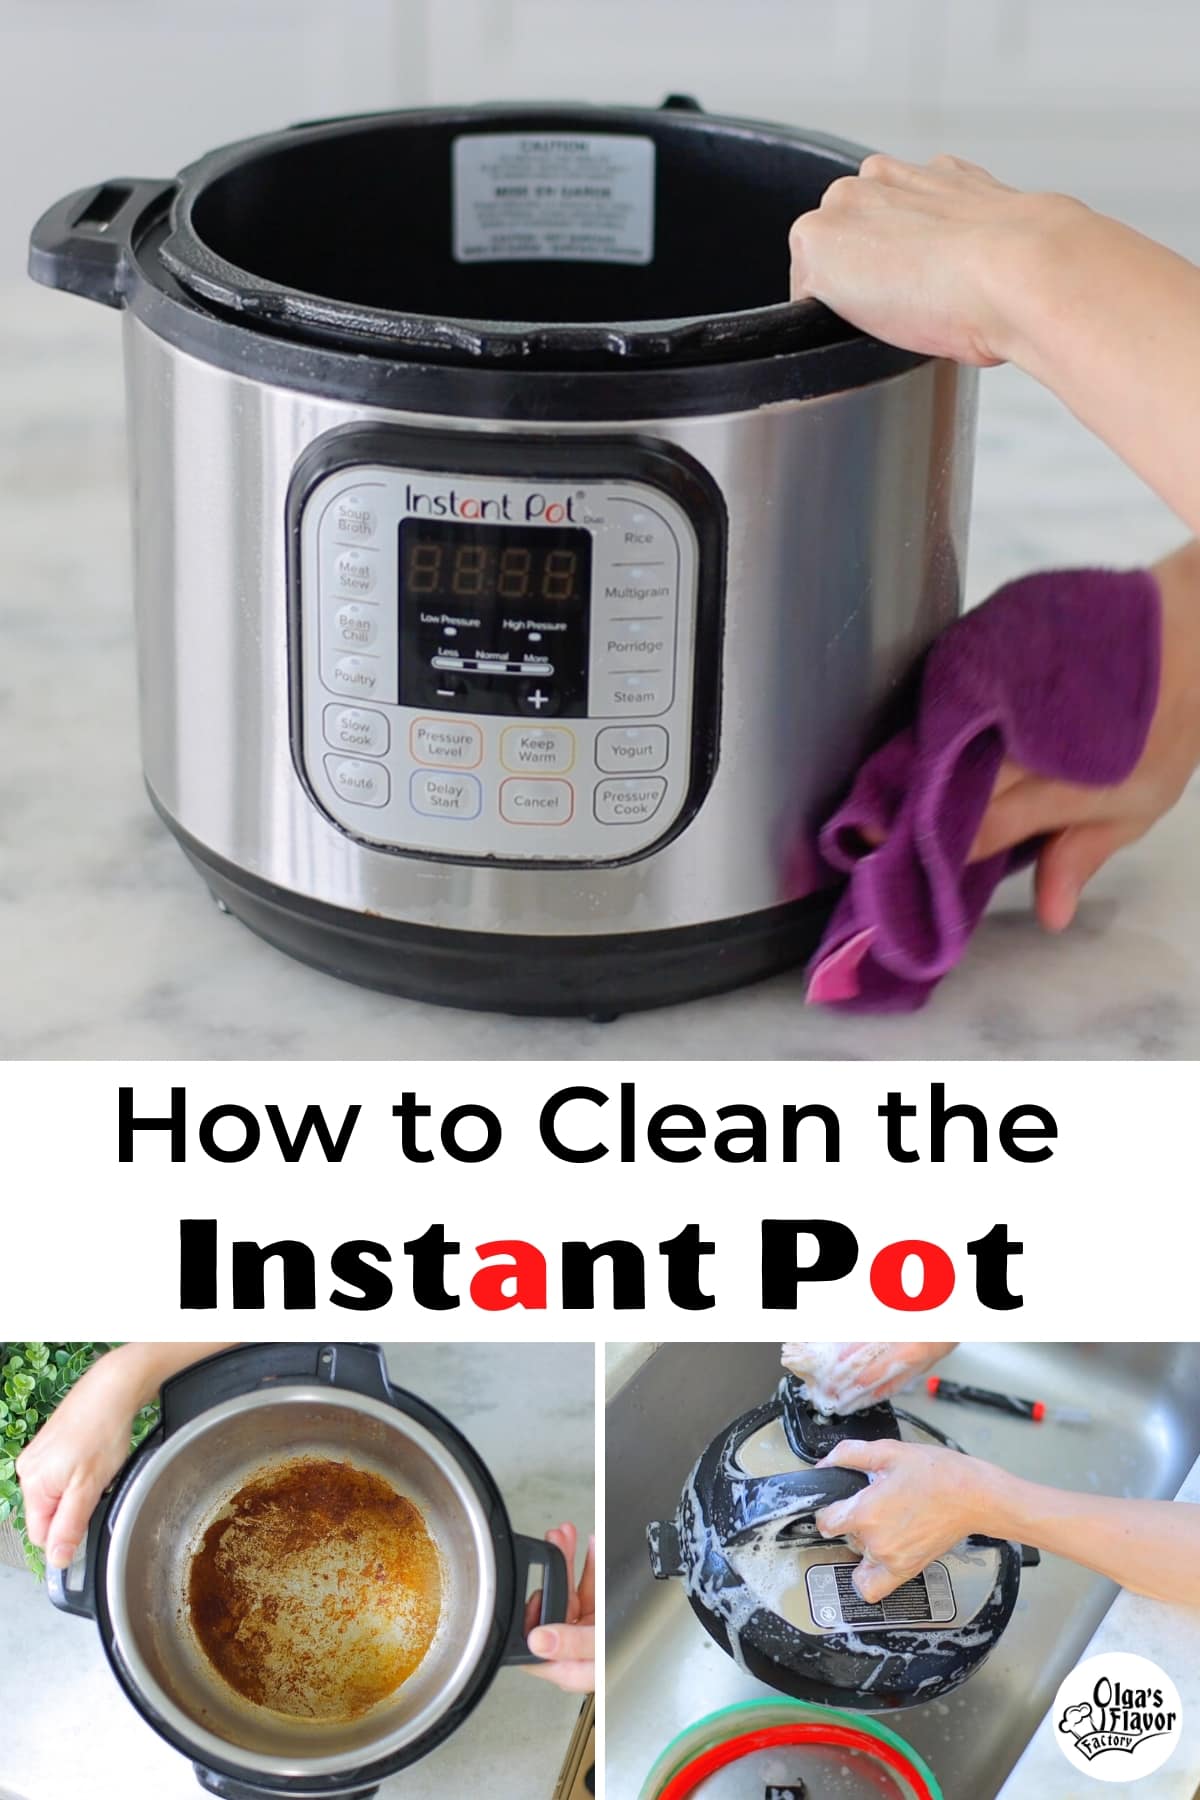 https://www.olgasflavorfactory.com/wp-content/uploads/2023/04/How-To-Clean-the-Instant-Pot-copy.jpg